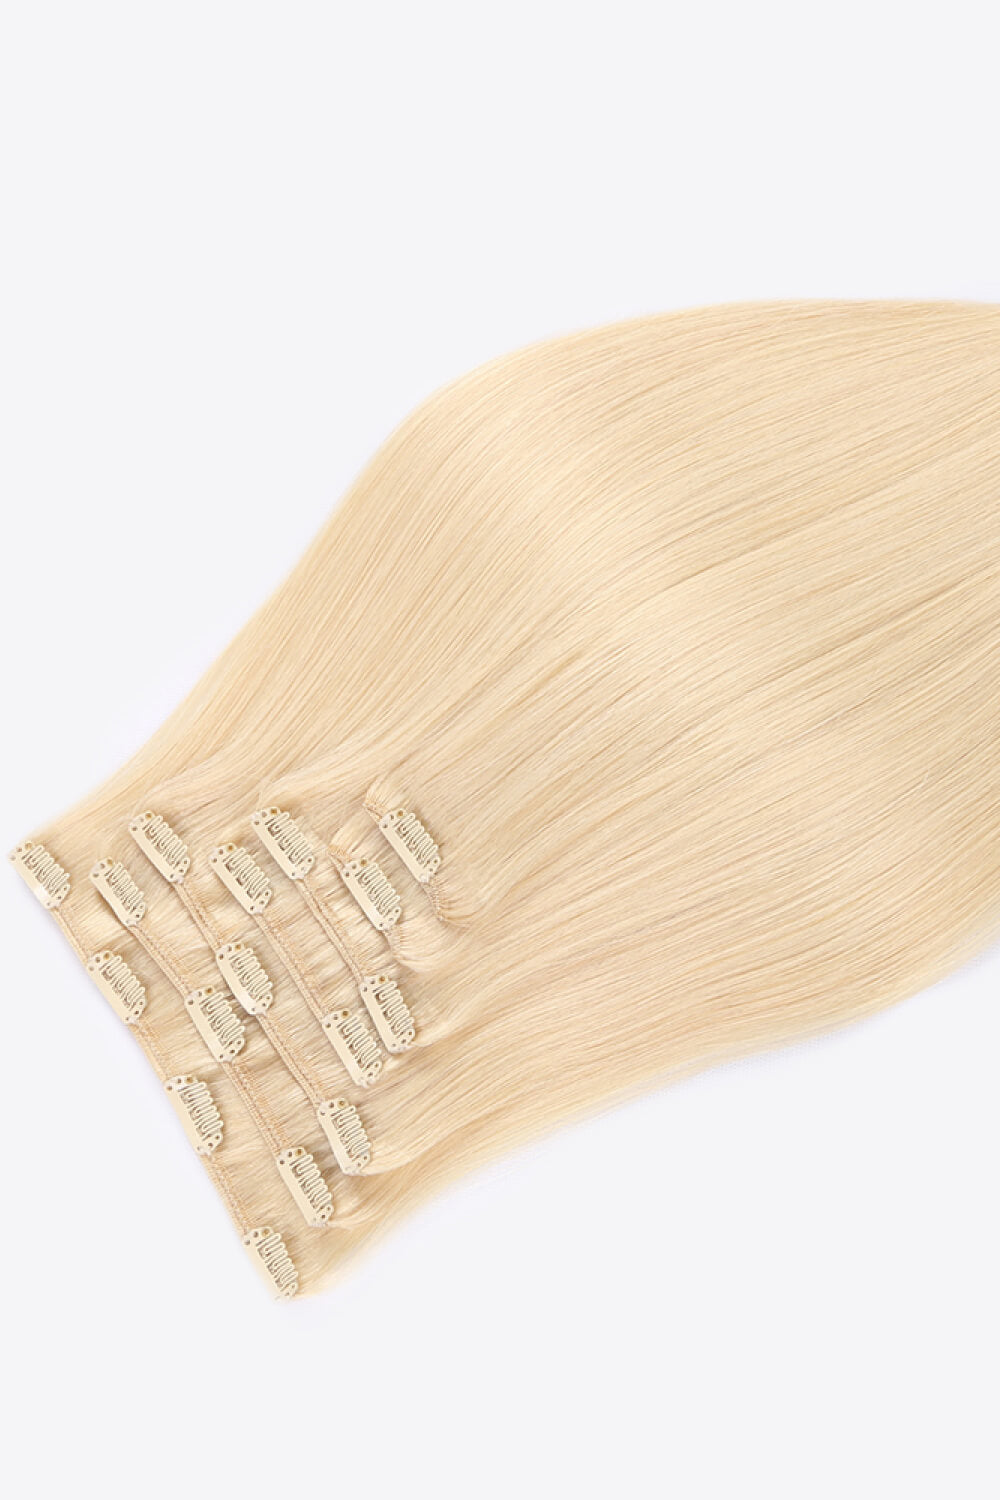 18" 80g Clip-In Hair Extensions Indian Human Hair in Blonde